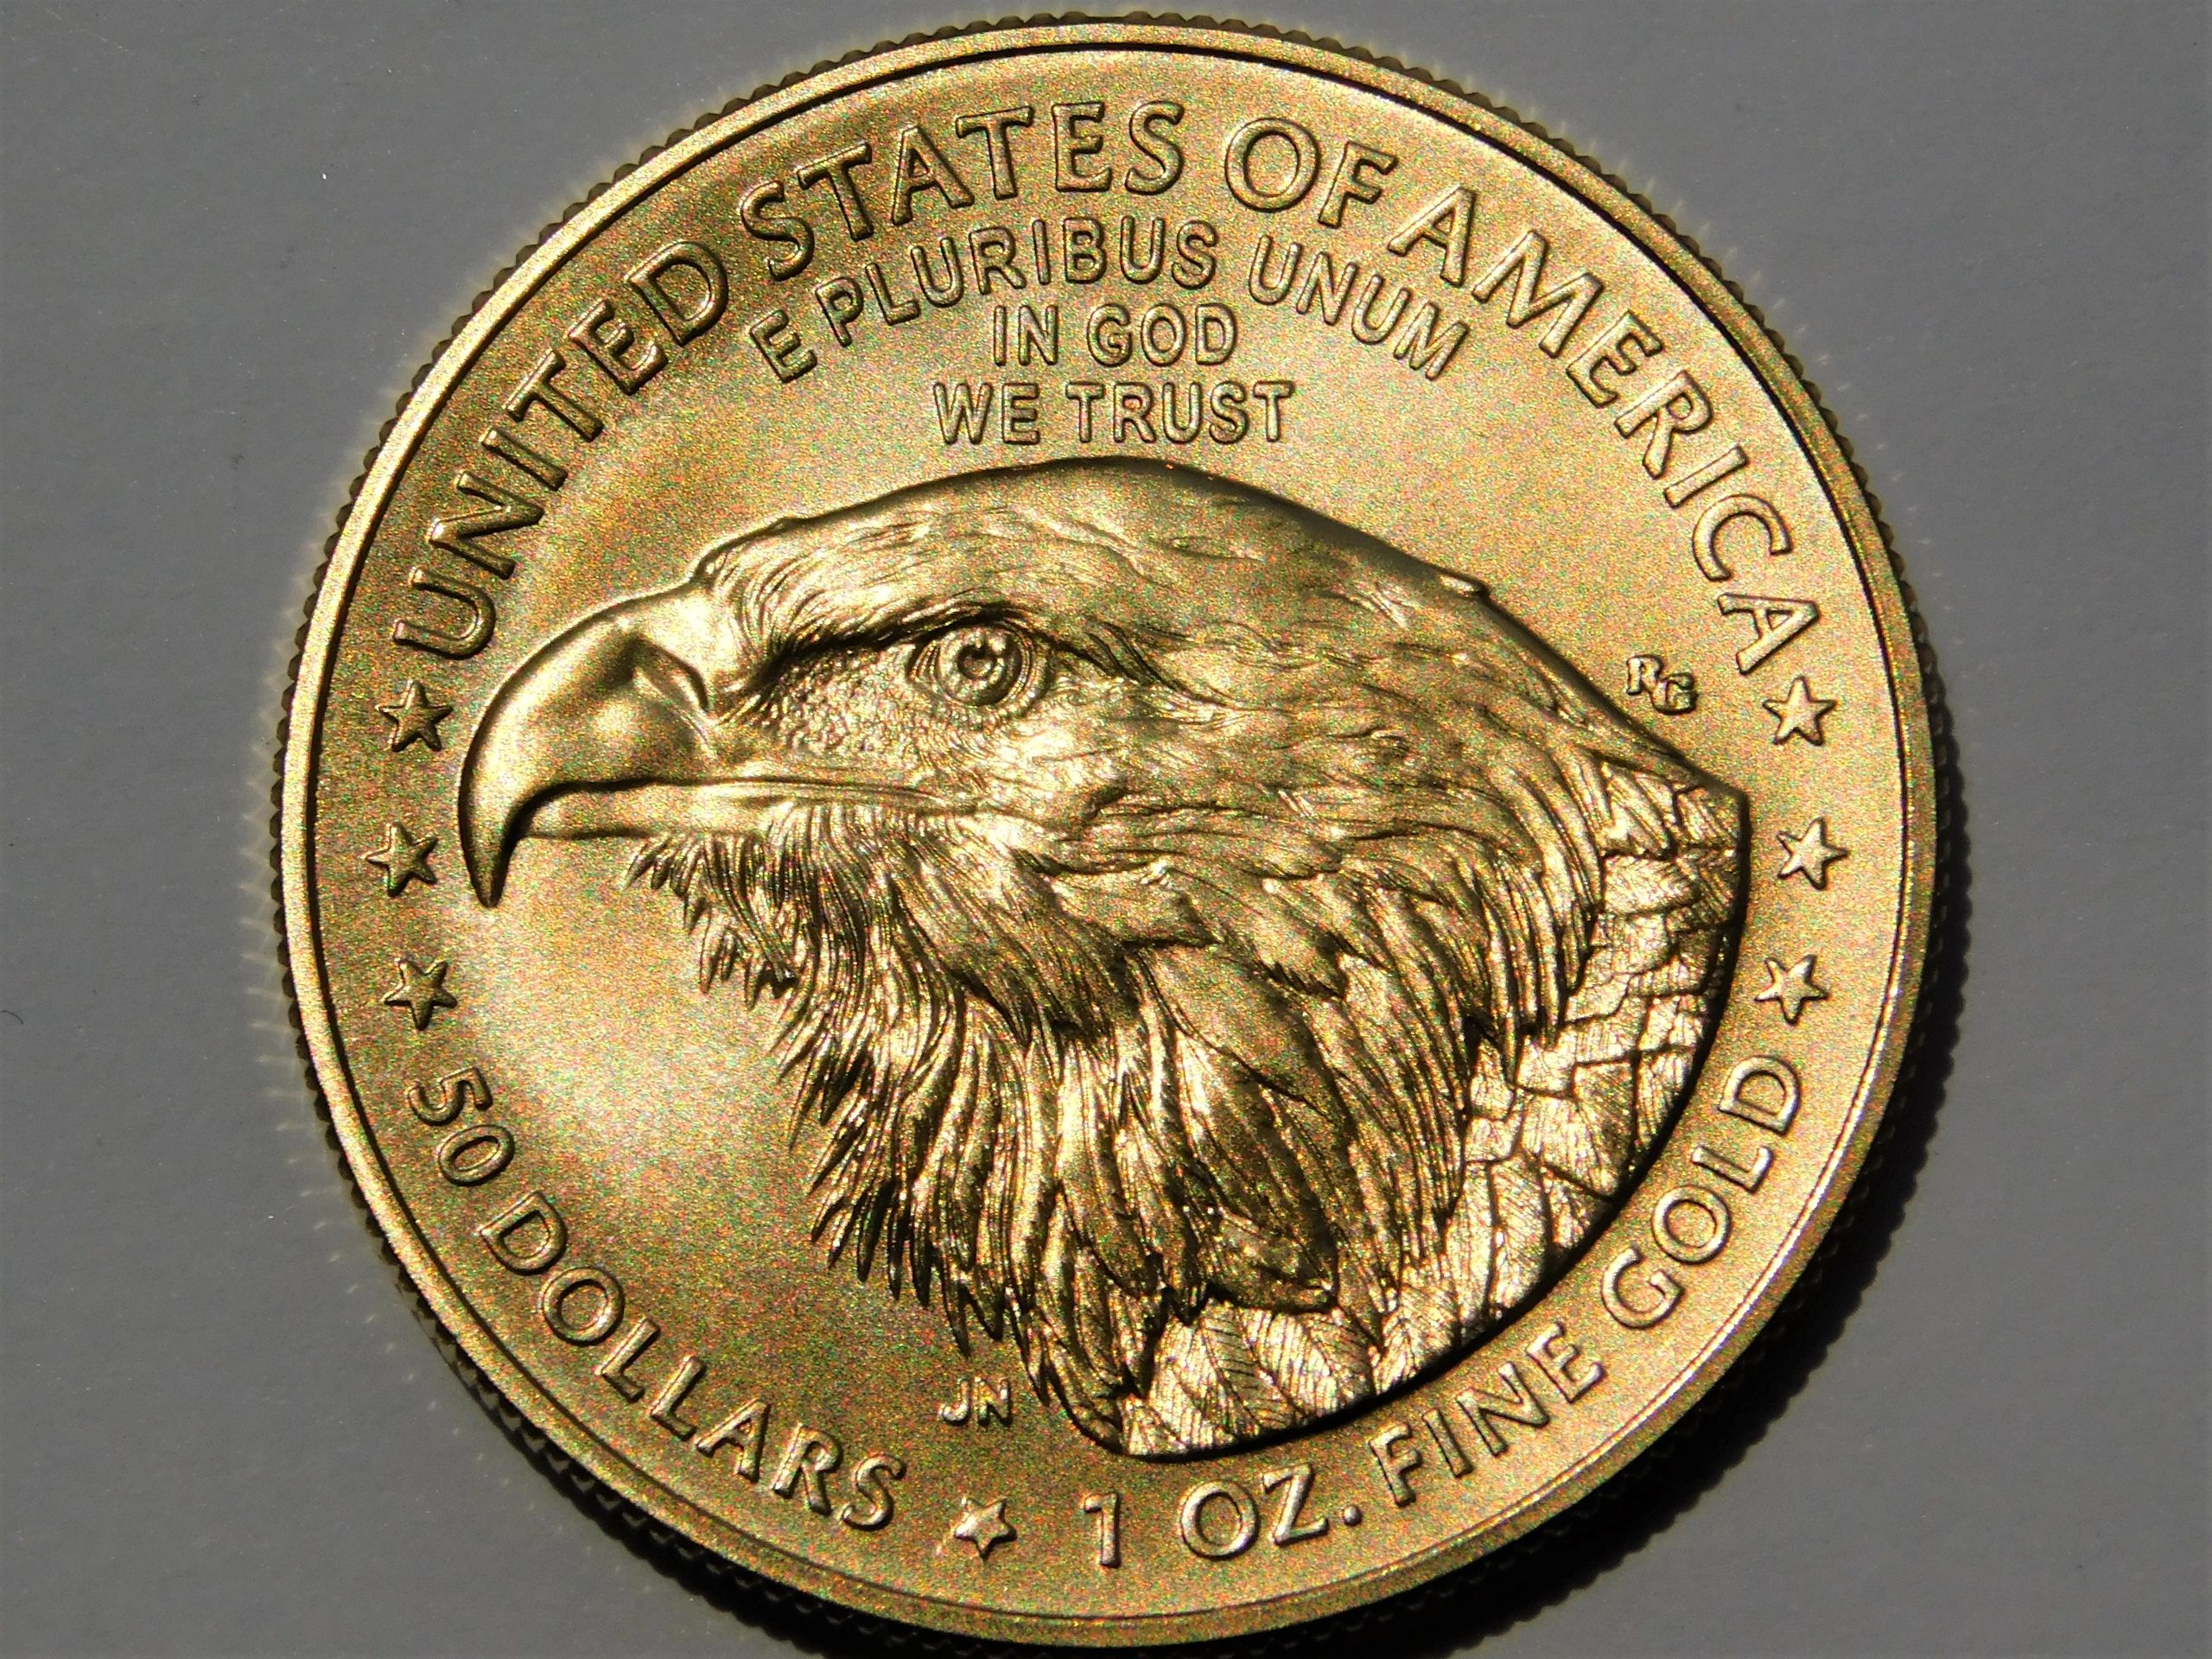 Raleigh Gold Coin Dealers-Best Place to Buy & Sell Gold-Silver-Coin  Collections-Rare Coins-Bullion - Selling Silver Coins, Silver Coins, Buying  Silver Coins